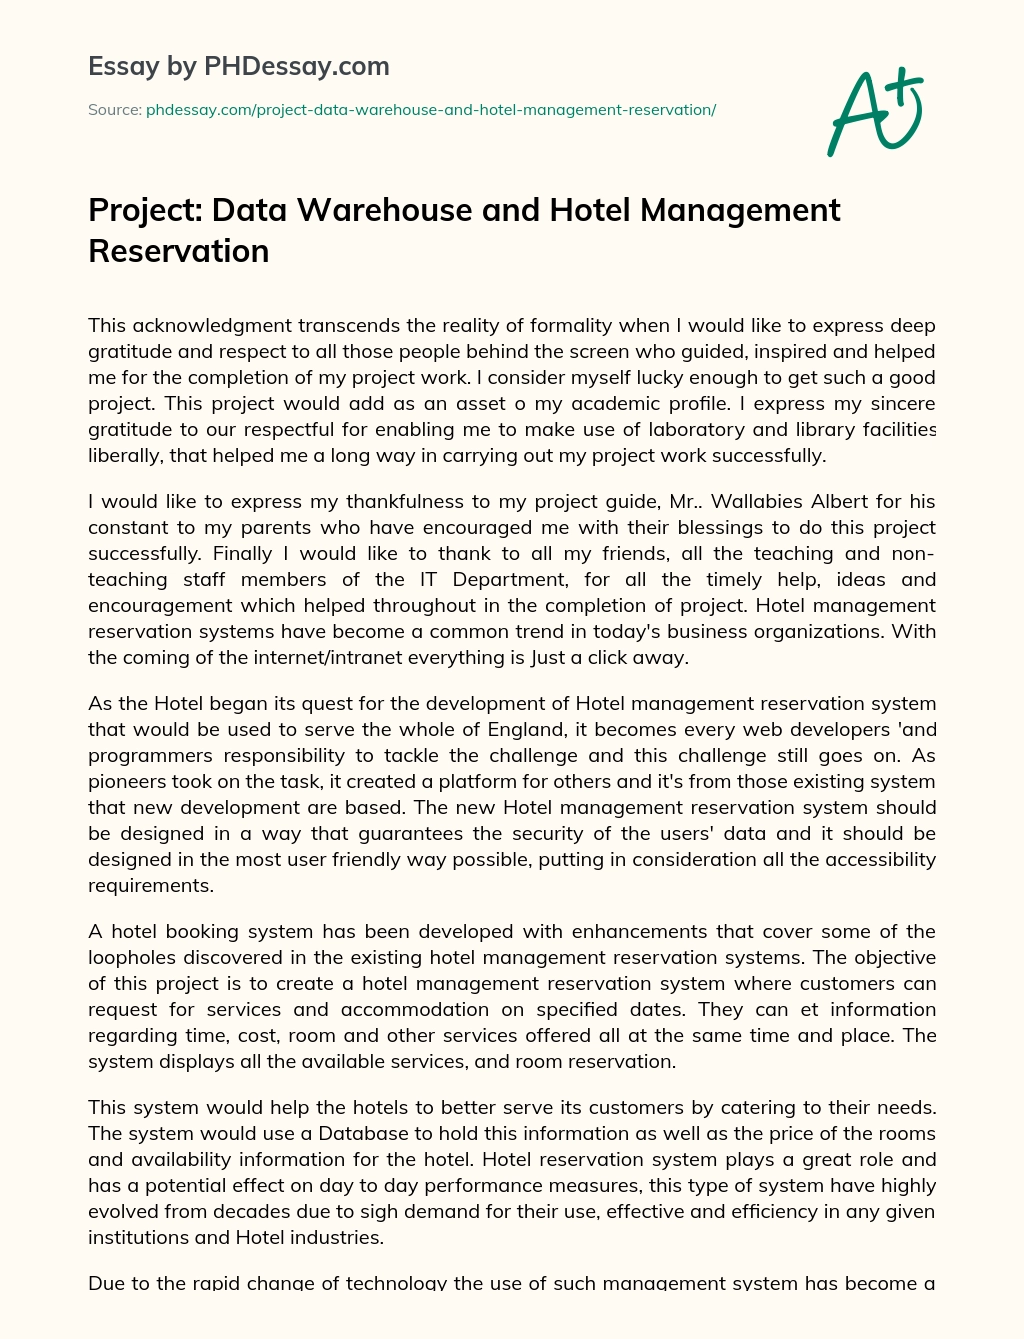 Project: Data Warehouse and Hotel Management Reservation essay